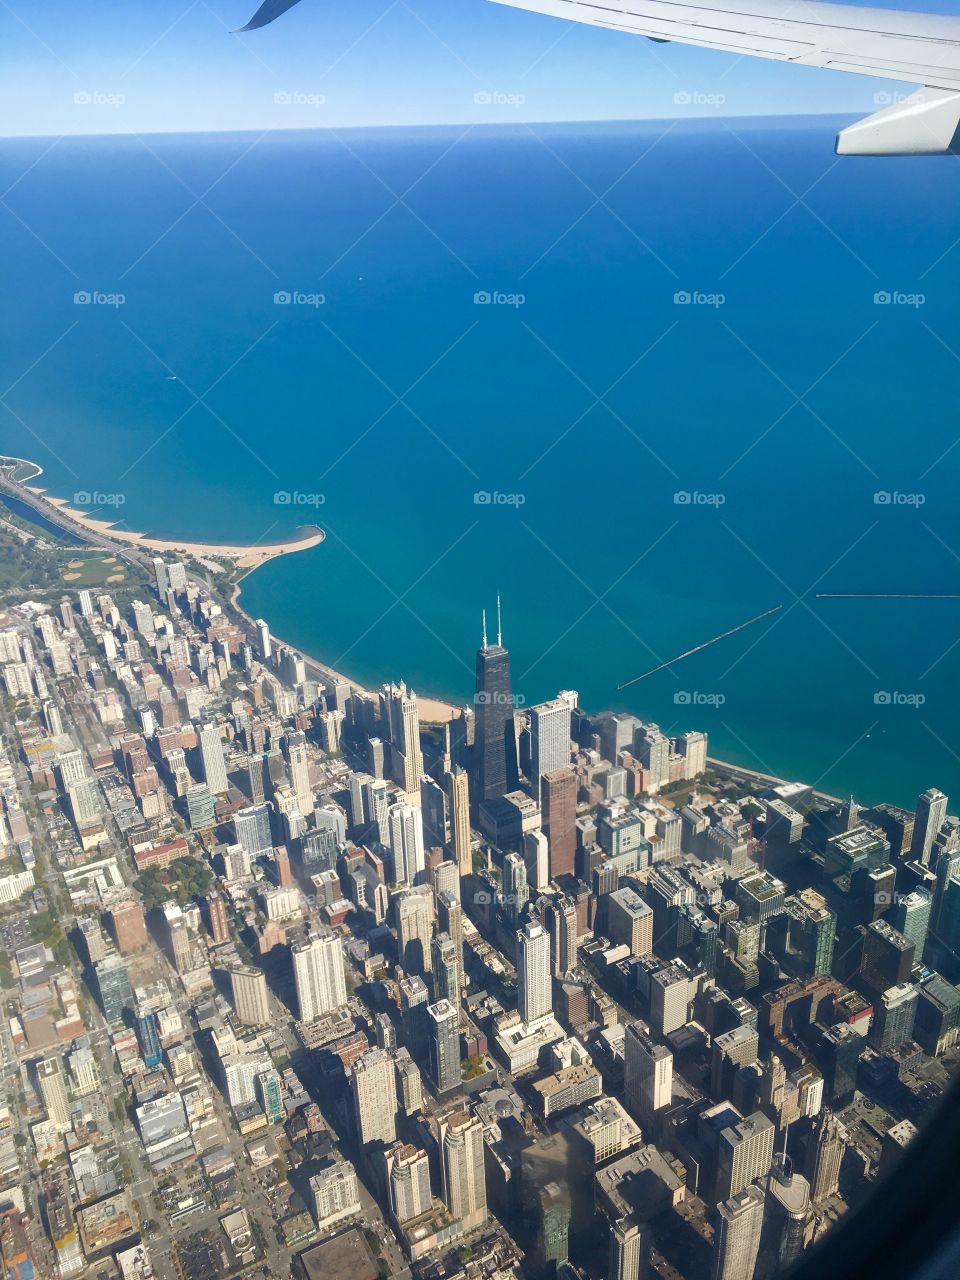 A view from the plane of Chicago along the coast of Lake Michigan.